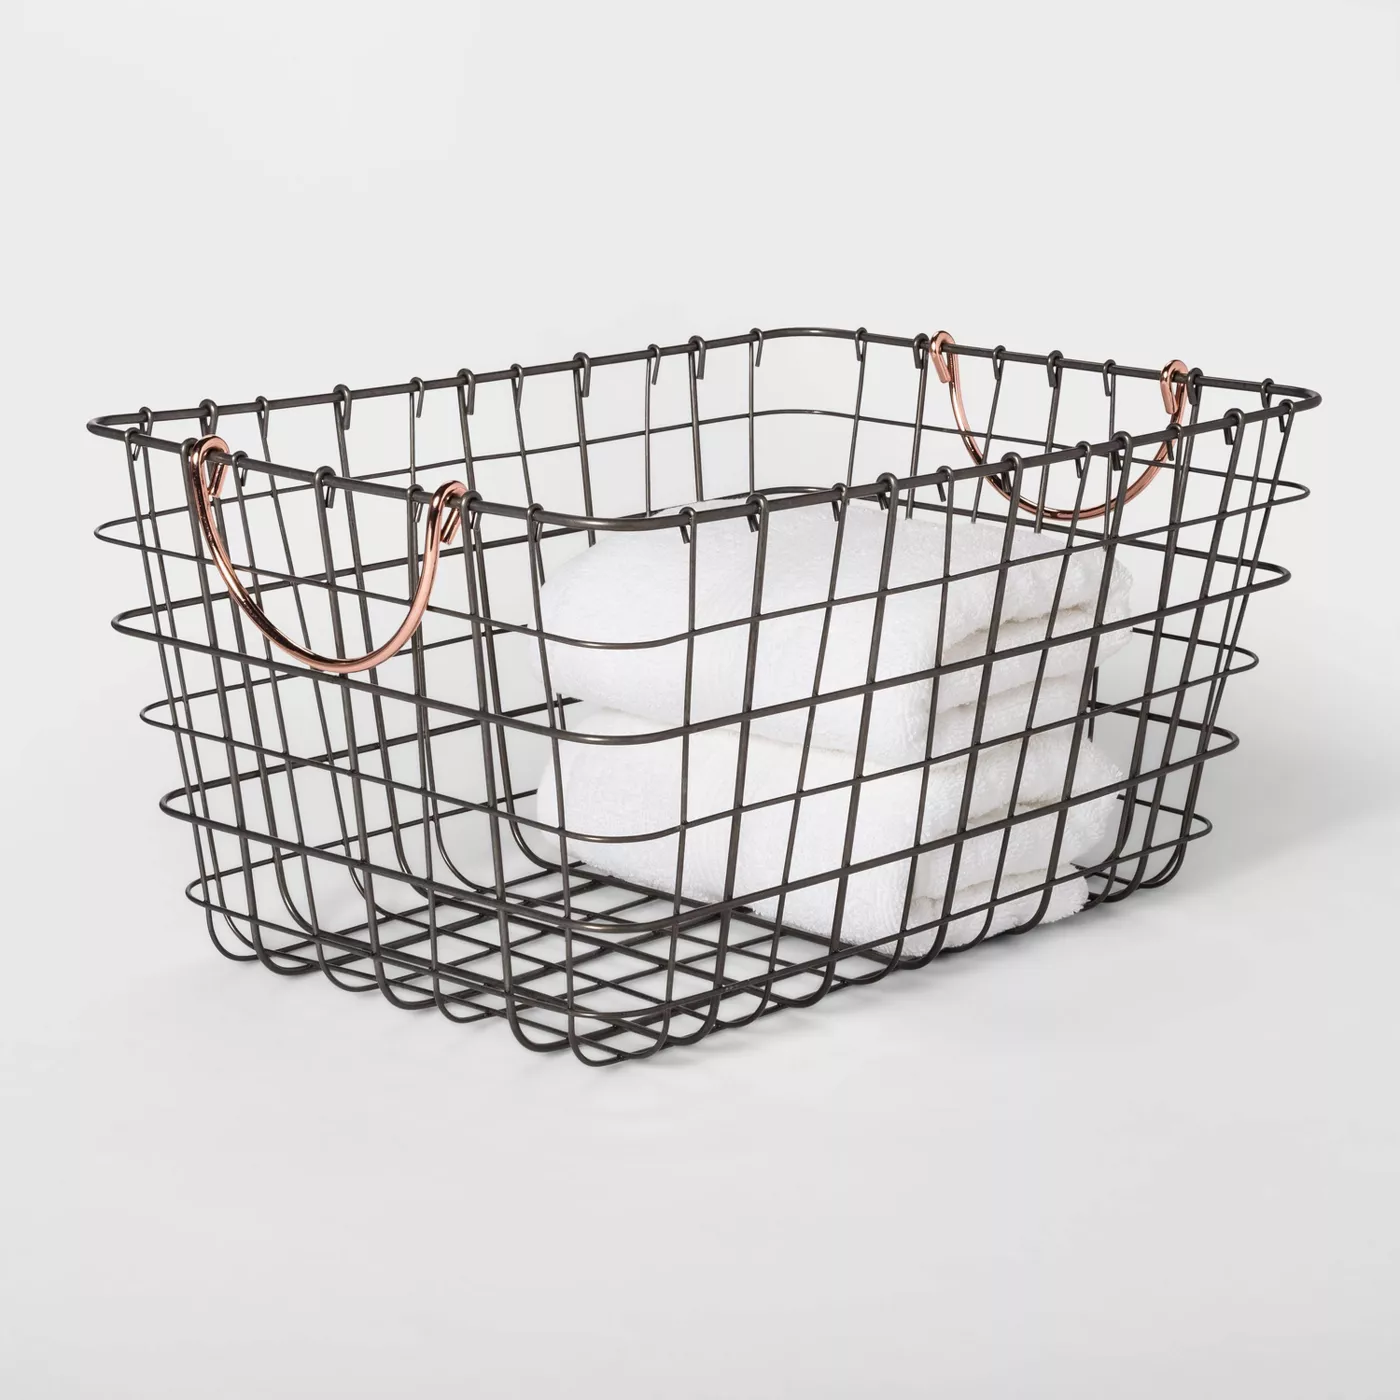 16"x11"x8" Wire Basket with Handle Gray/Copper - Threshold™ - image 2 of 4